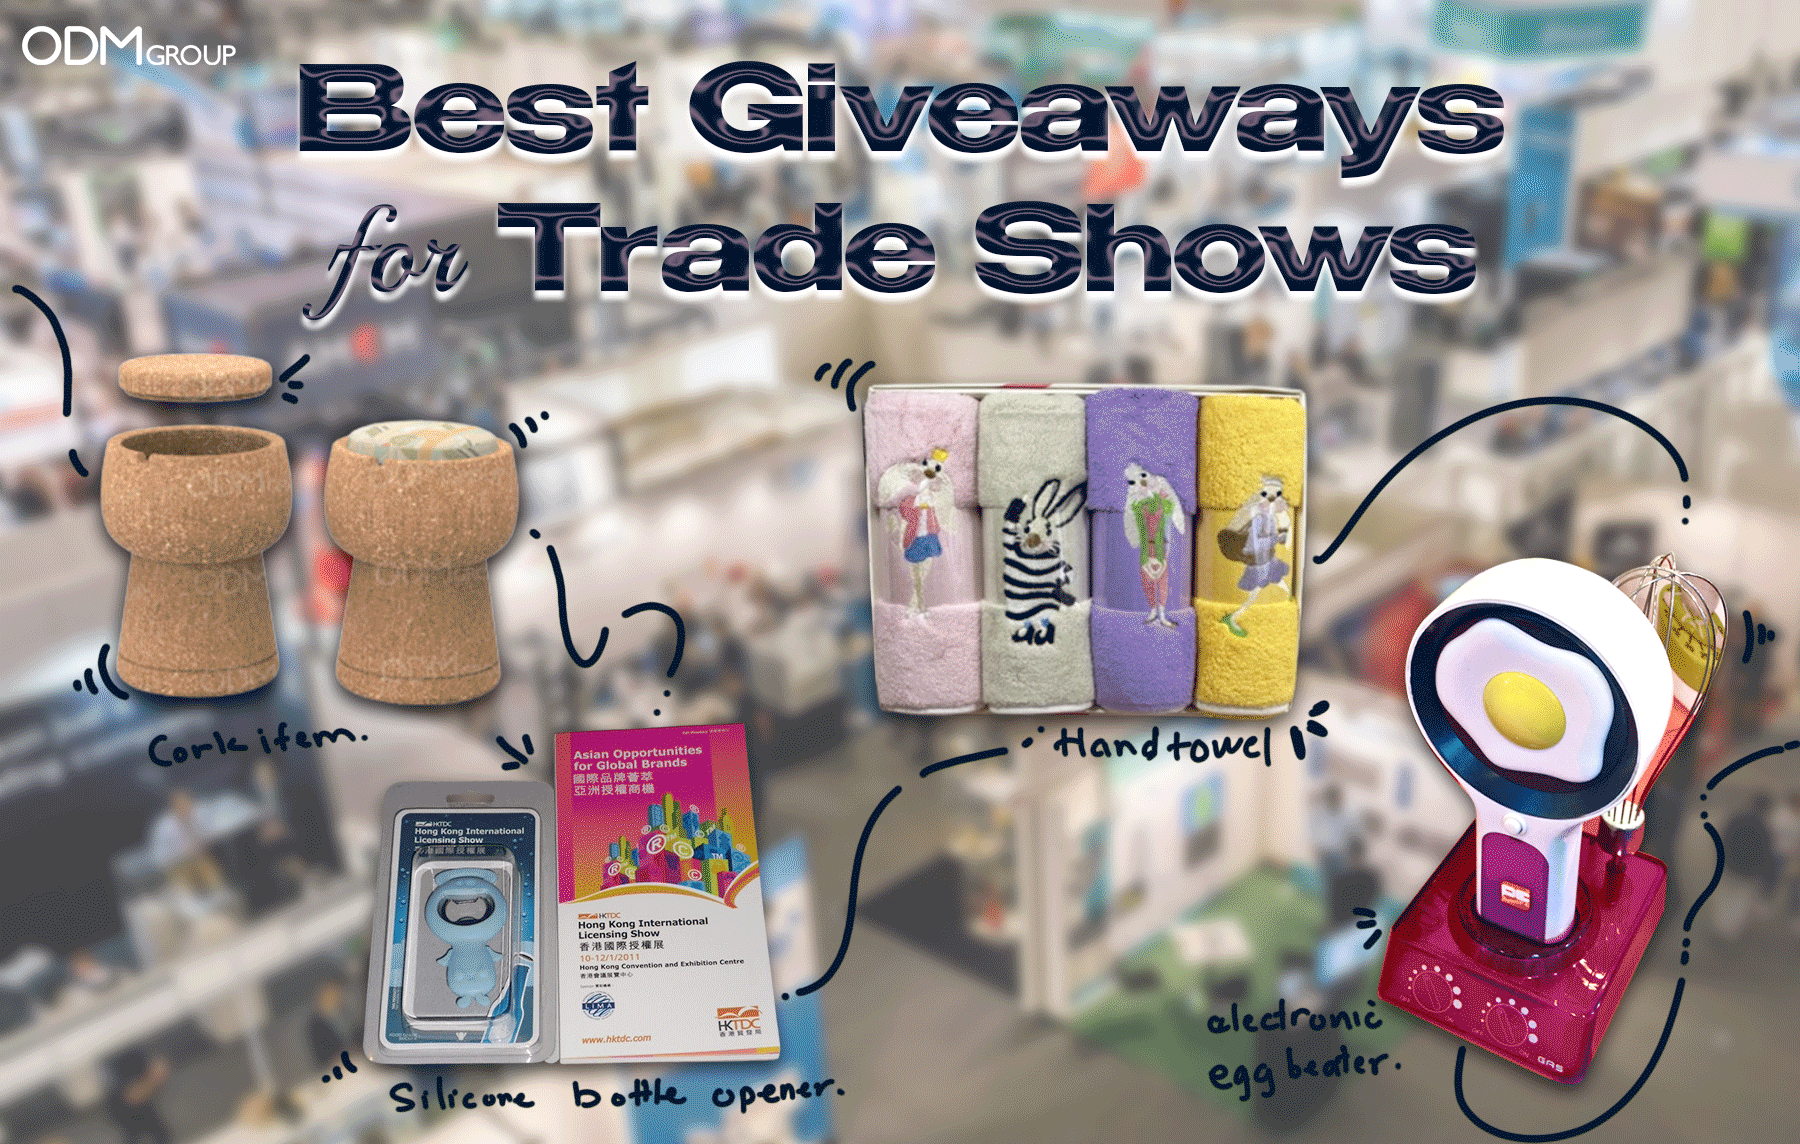 Best Giveaways for Tradeshows